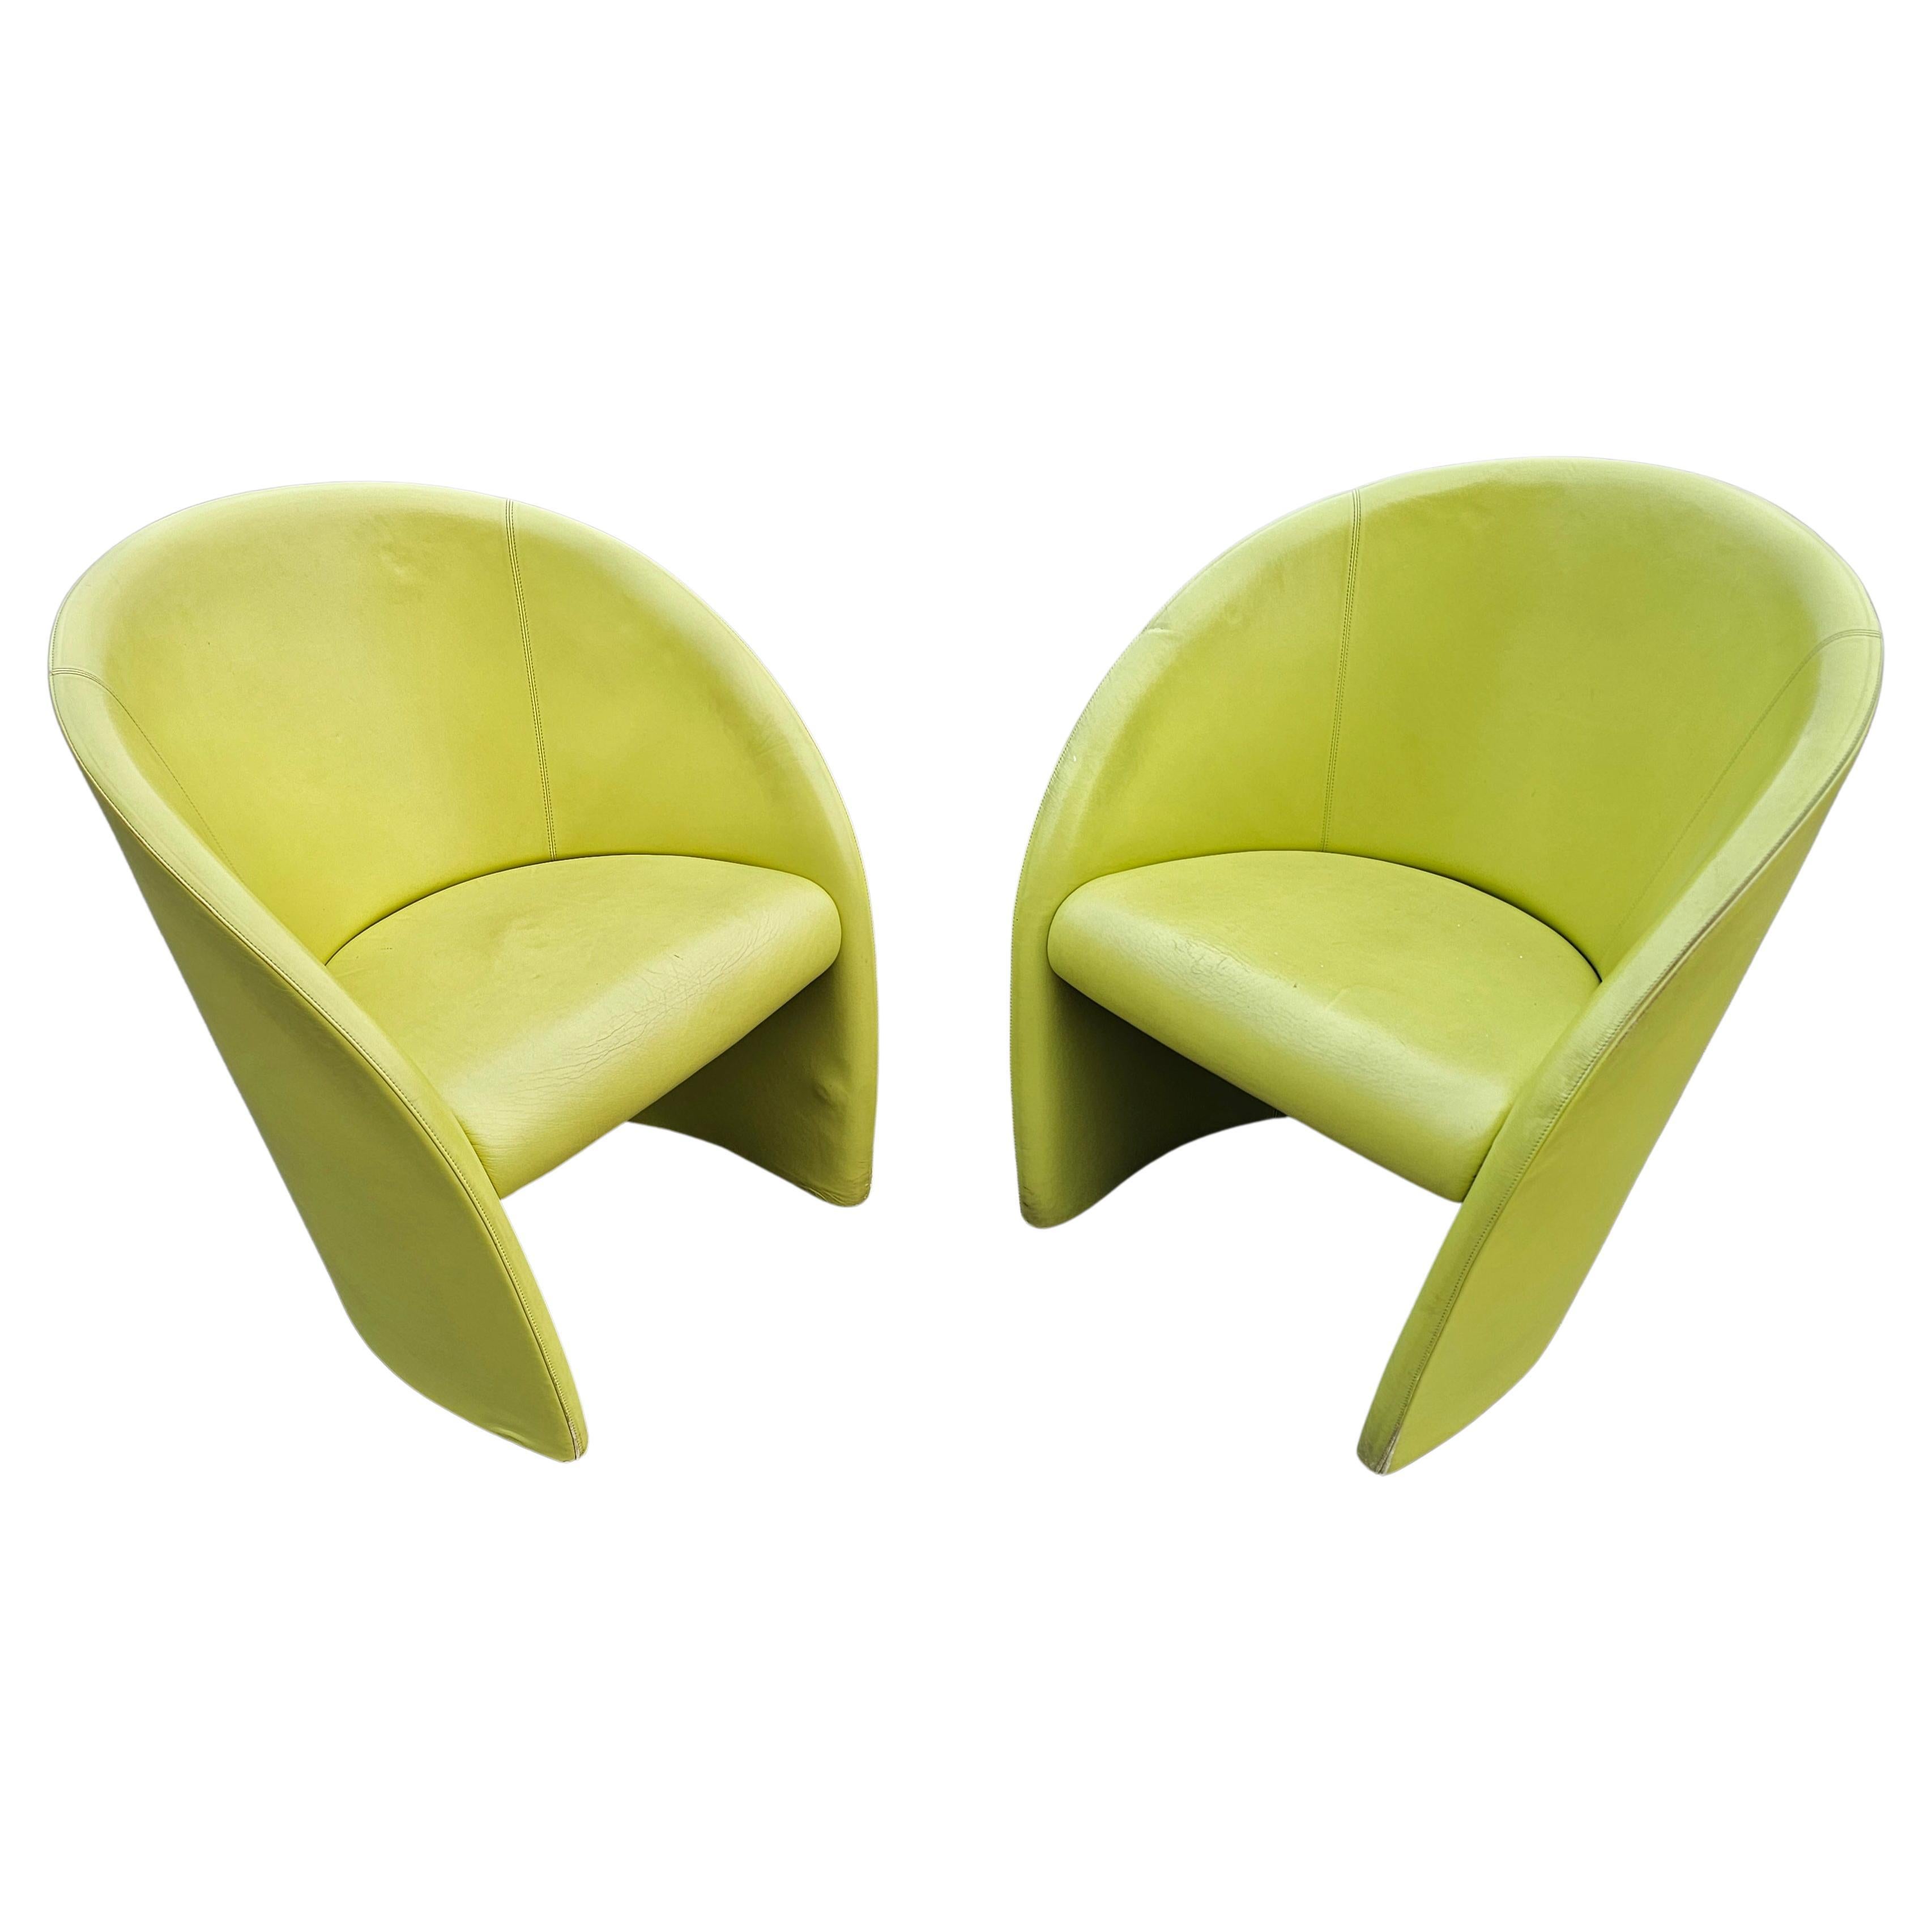 1 of 5 Intervista Club Chairs by Poltrona Frau in Chartreuse Leather, Italy 1989